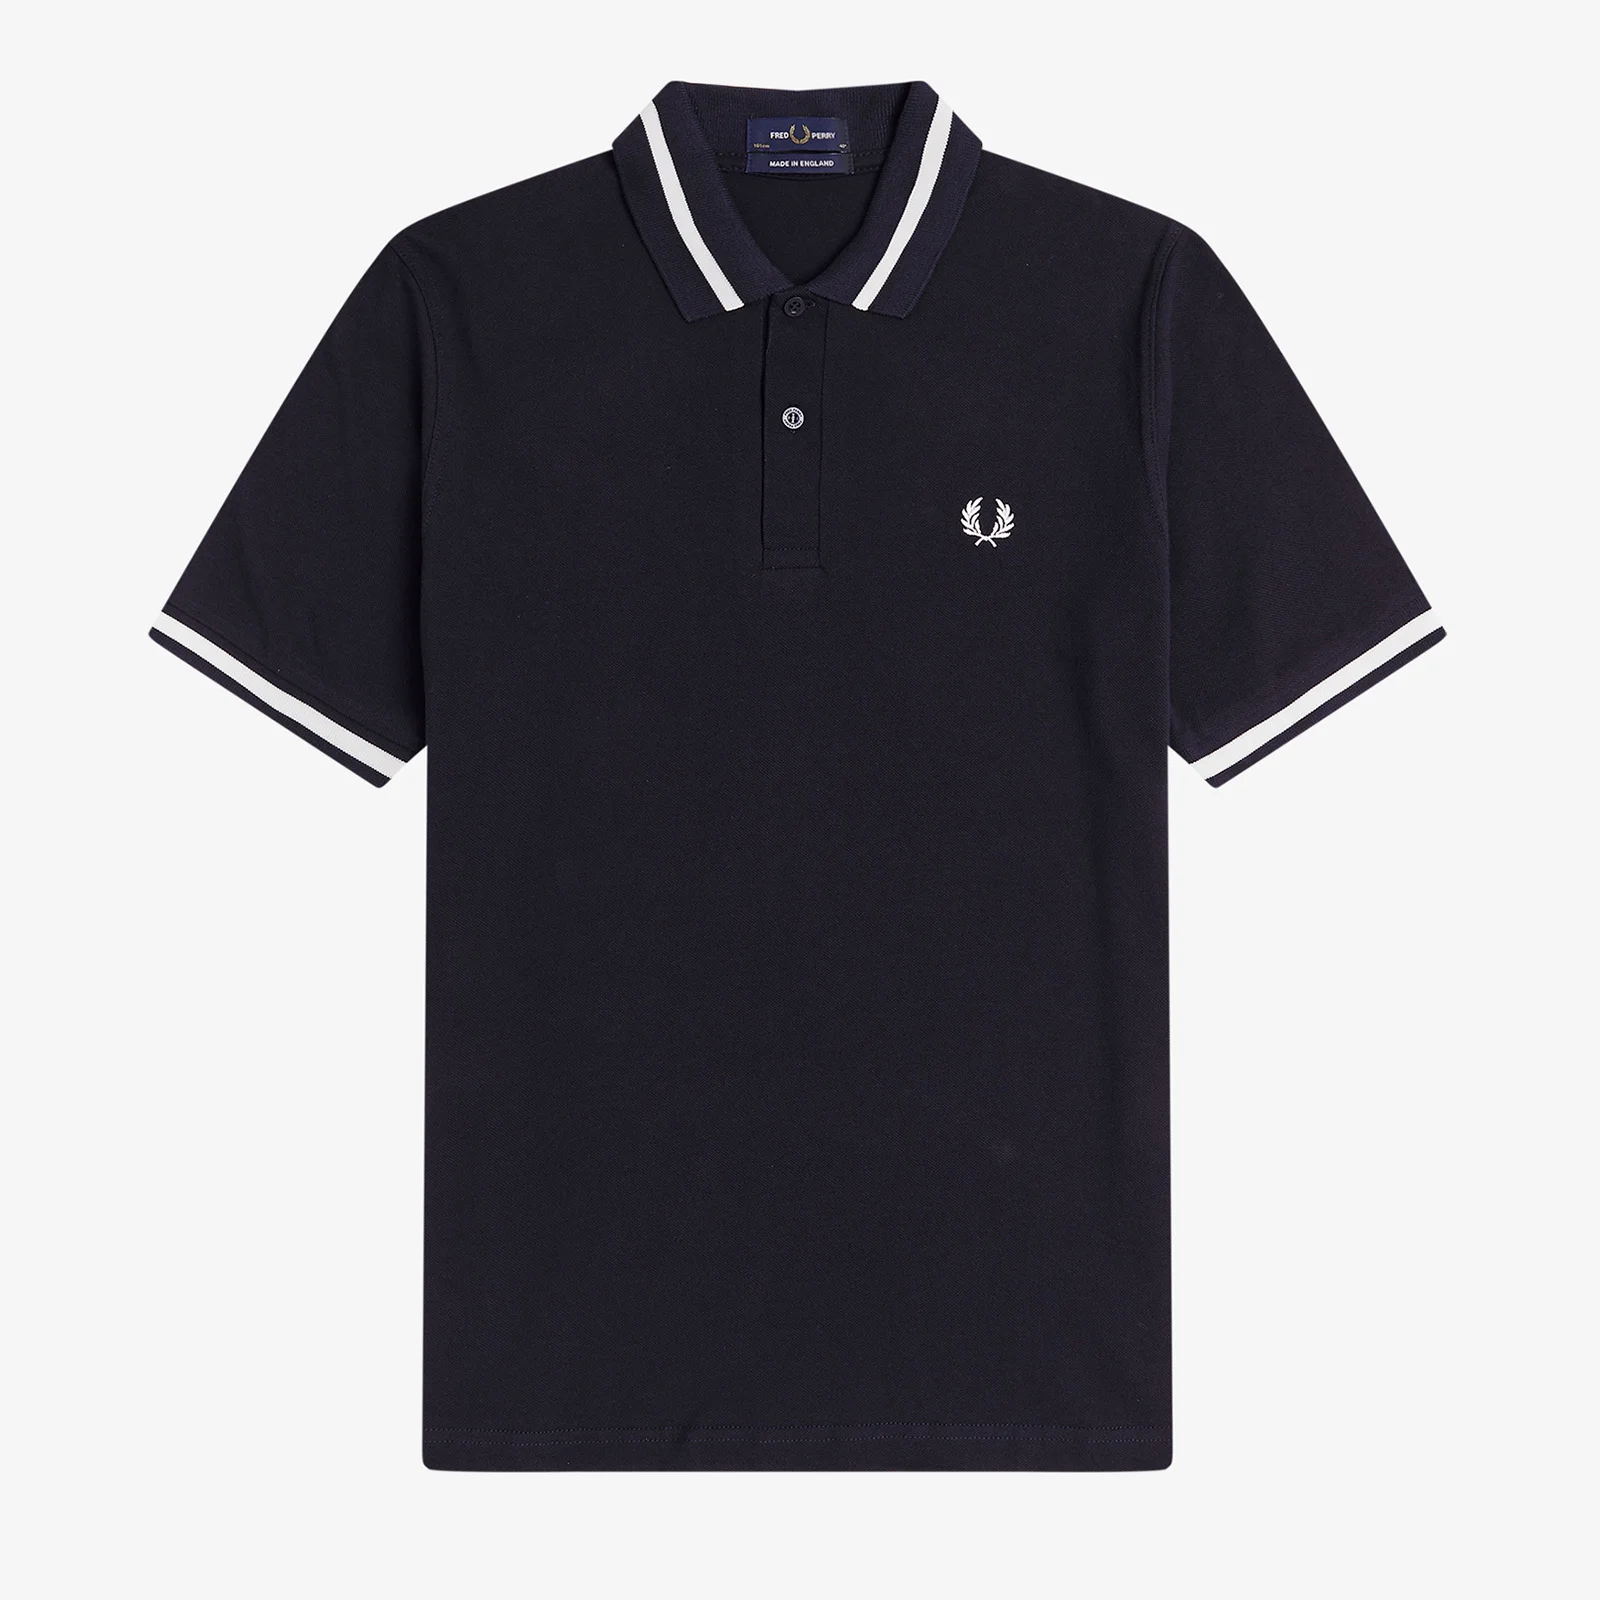 Fred Perry Men's Made In England Single Tipped Polo Shirt - Navy Image 1